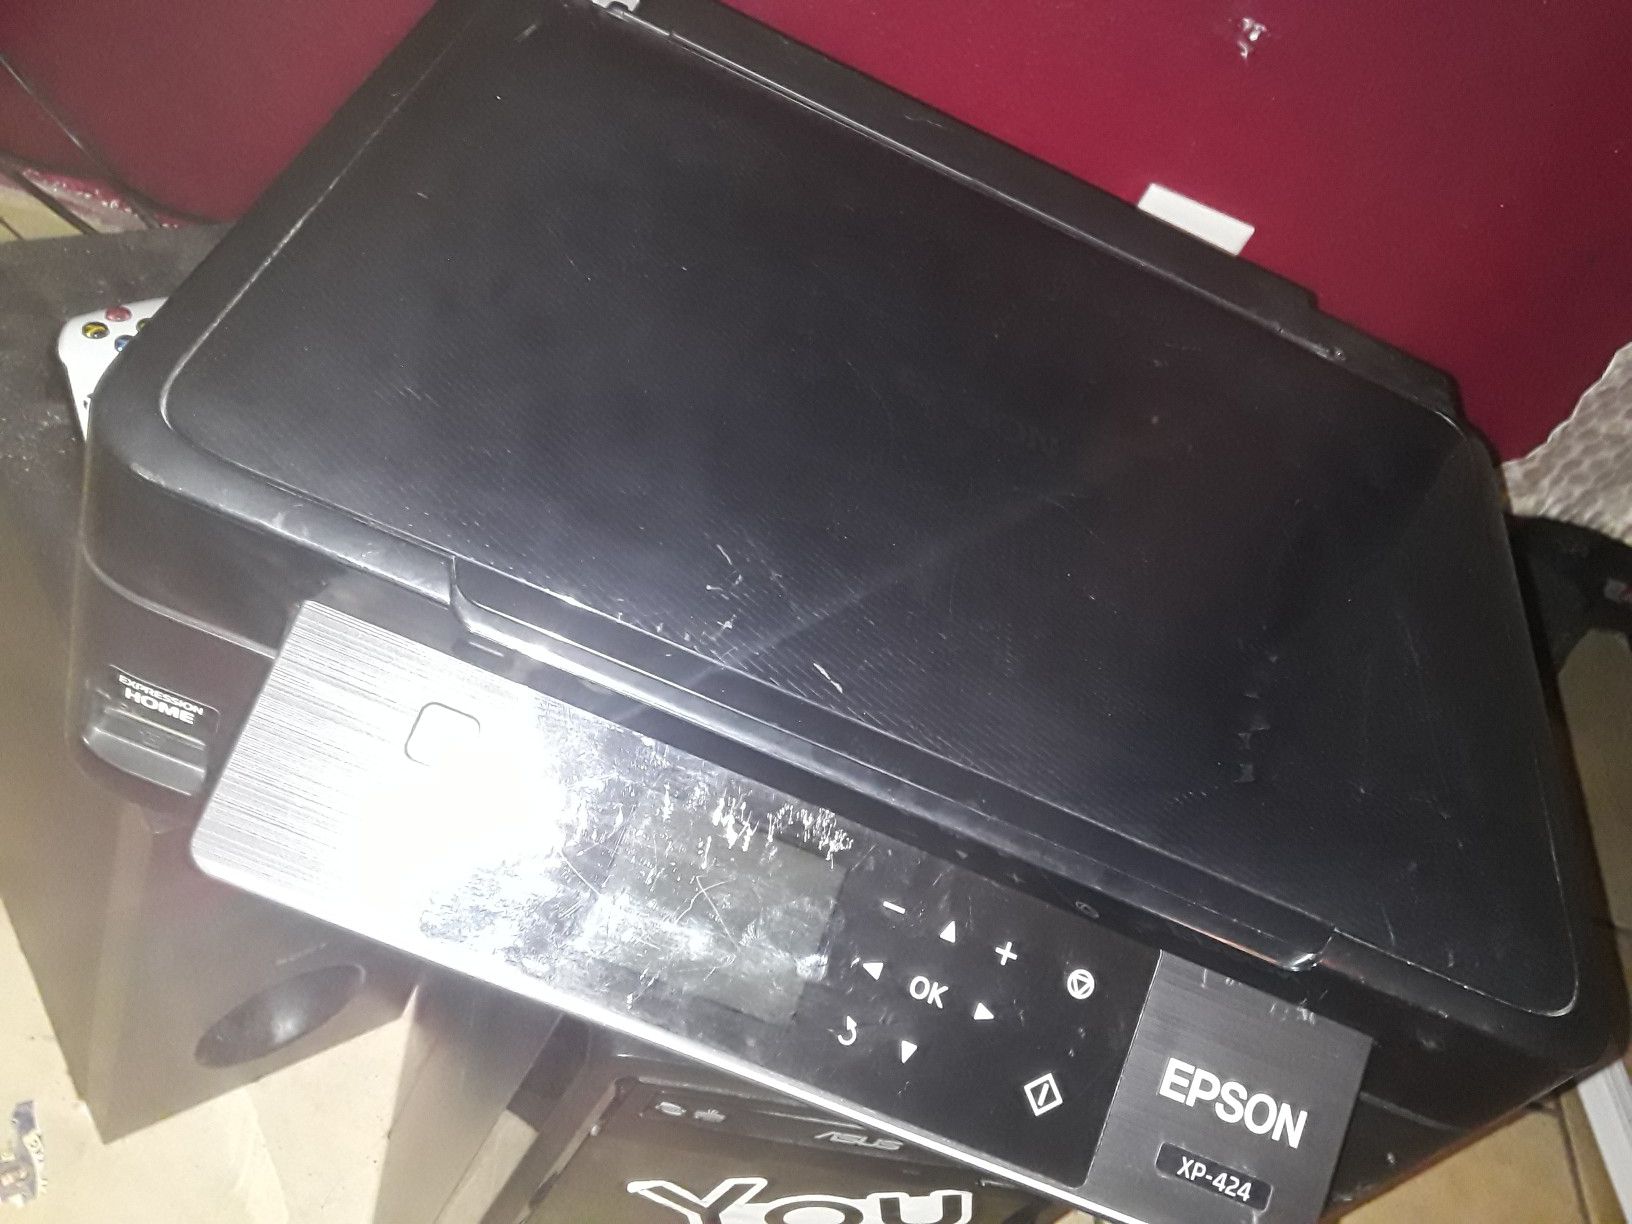 Epson XP-424 wire /wireless printer works perfectly fine just has a few scratches